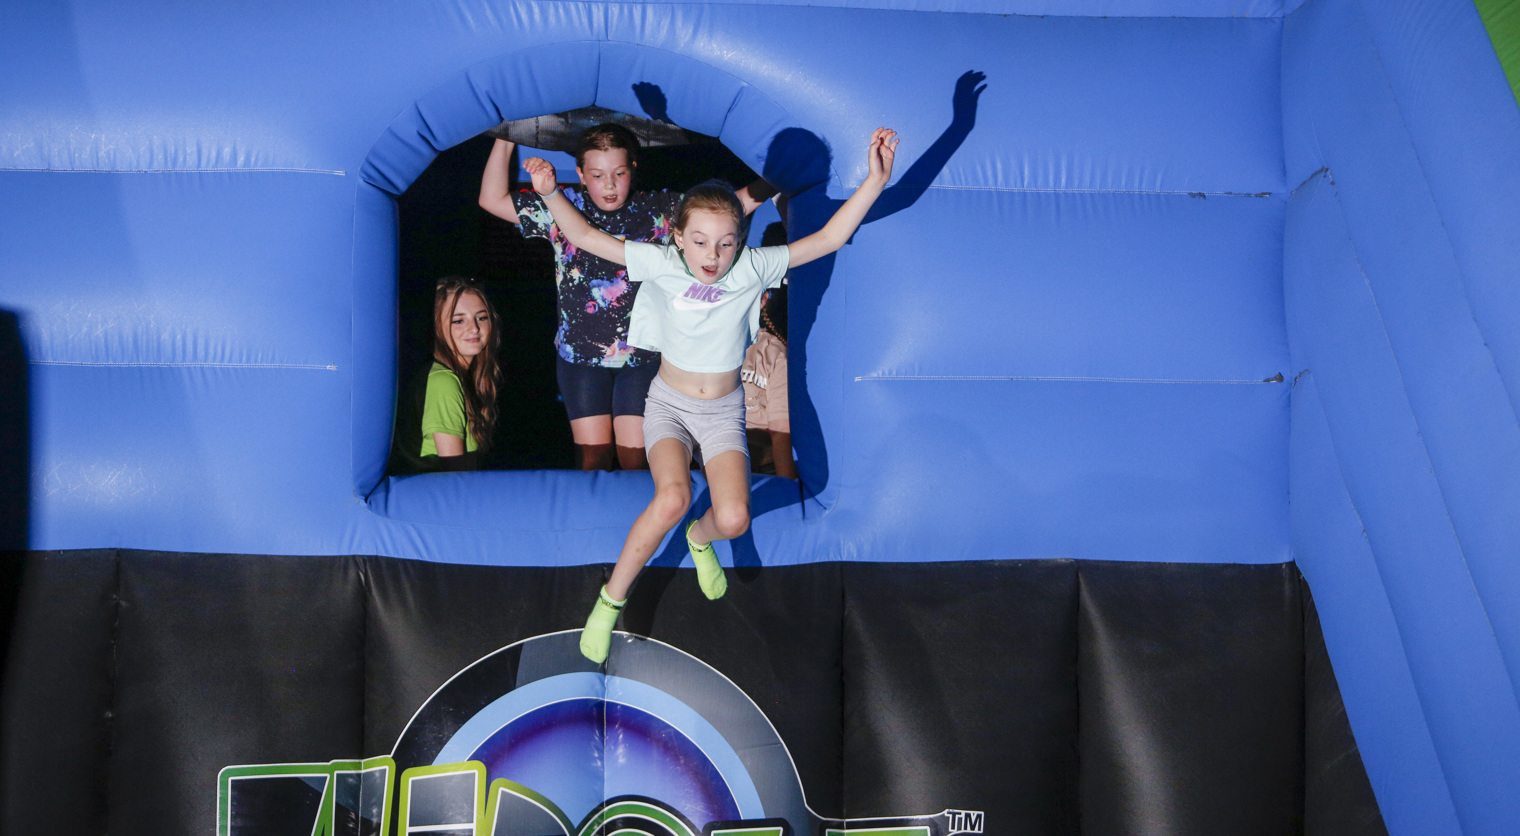 A child leaping into Free Fall on an inflatable at Flip Out UK